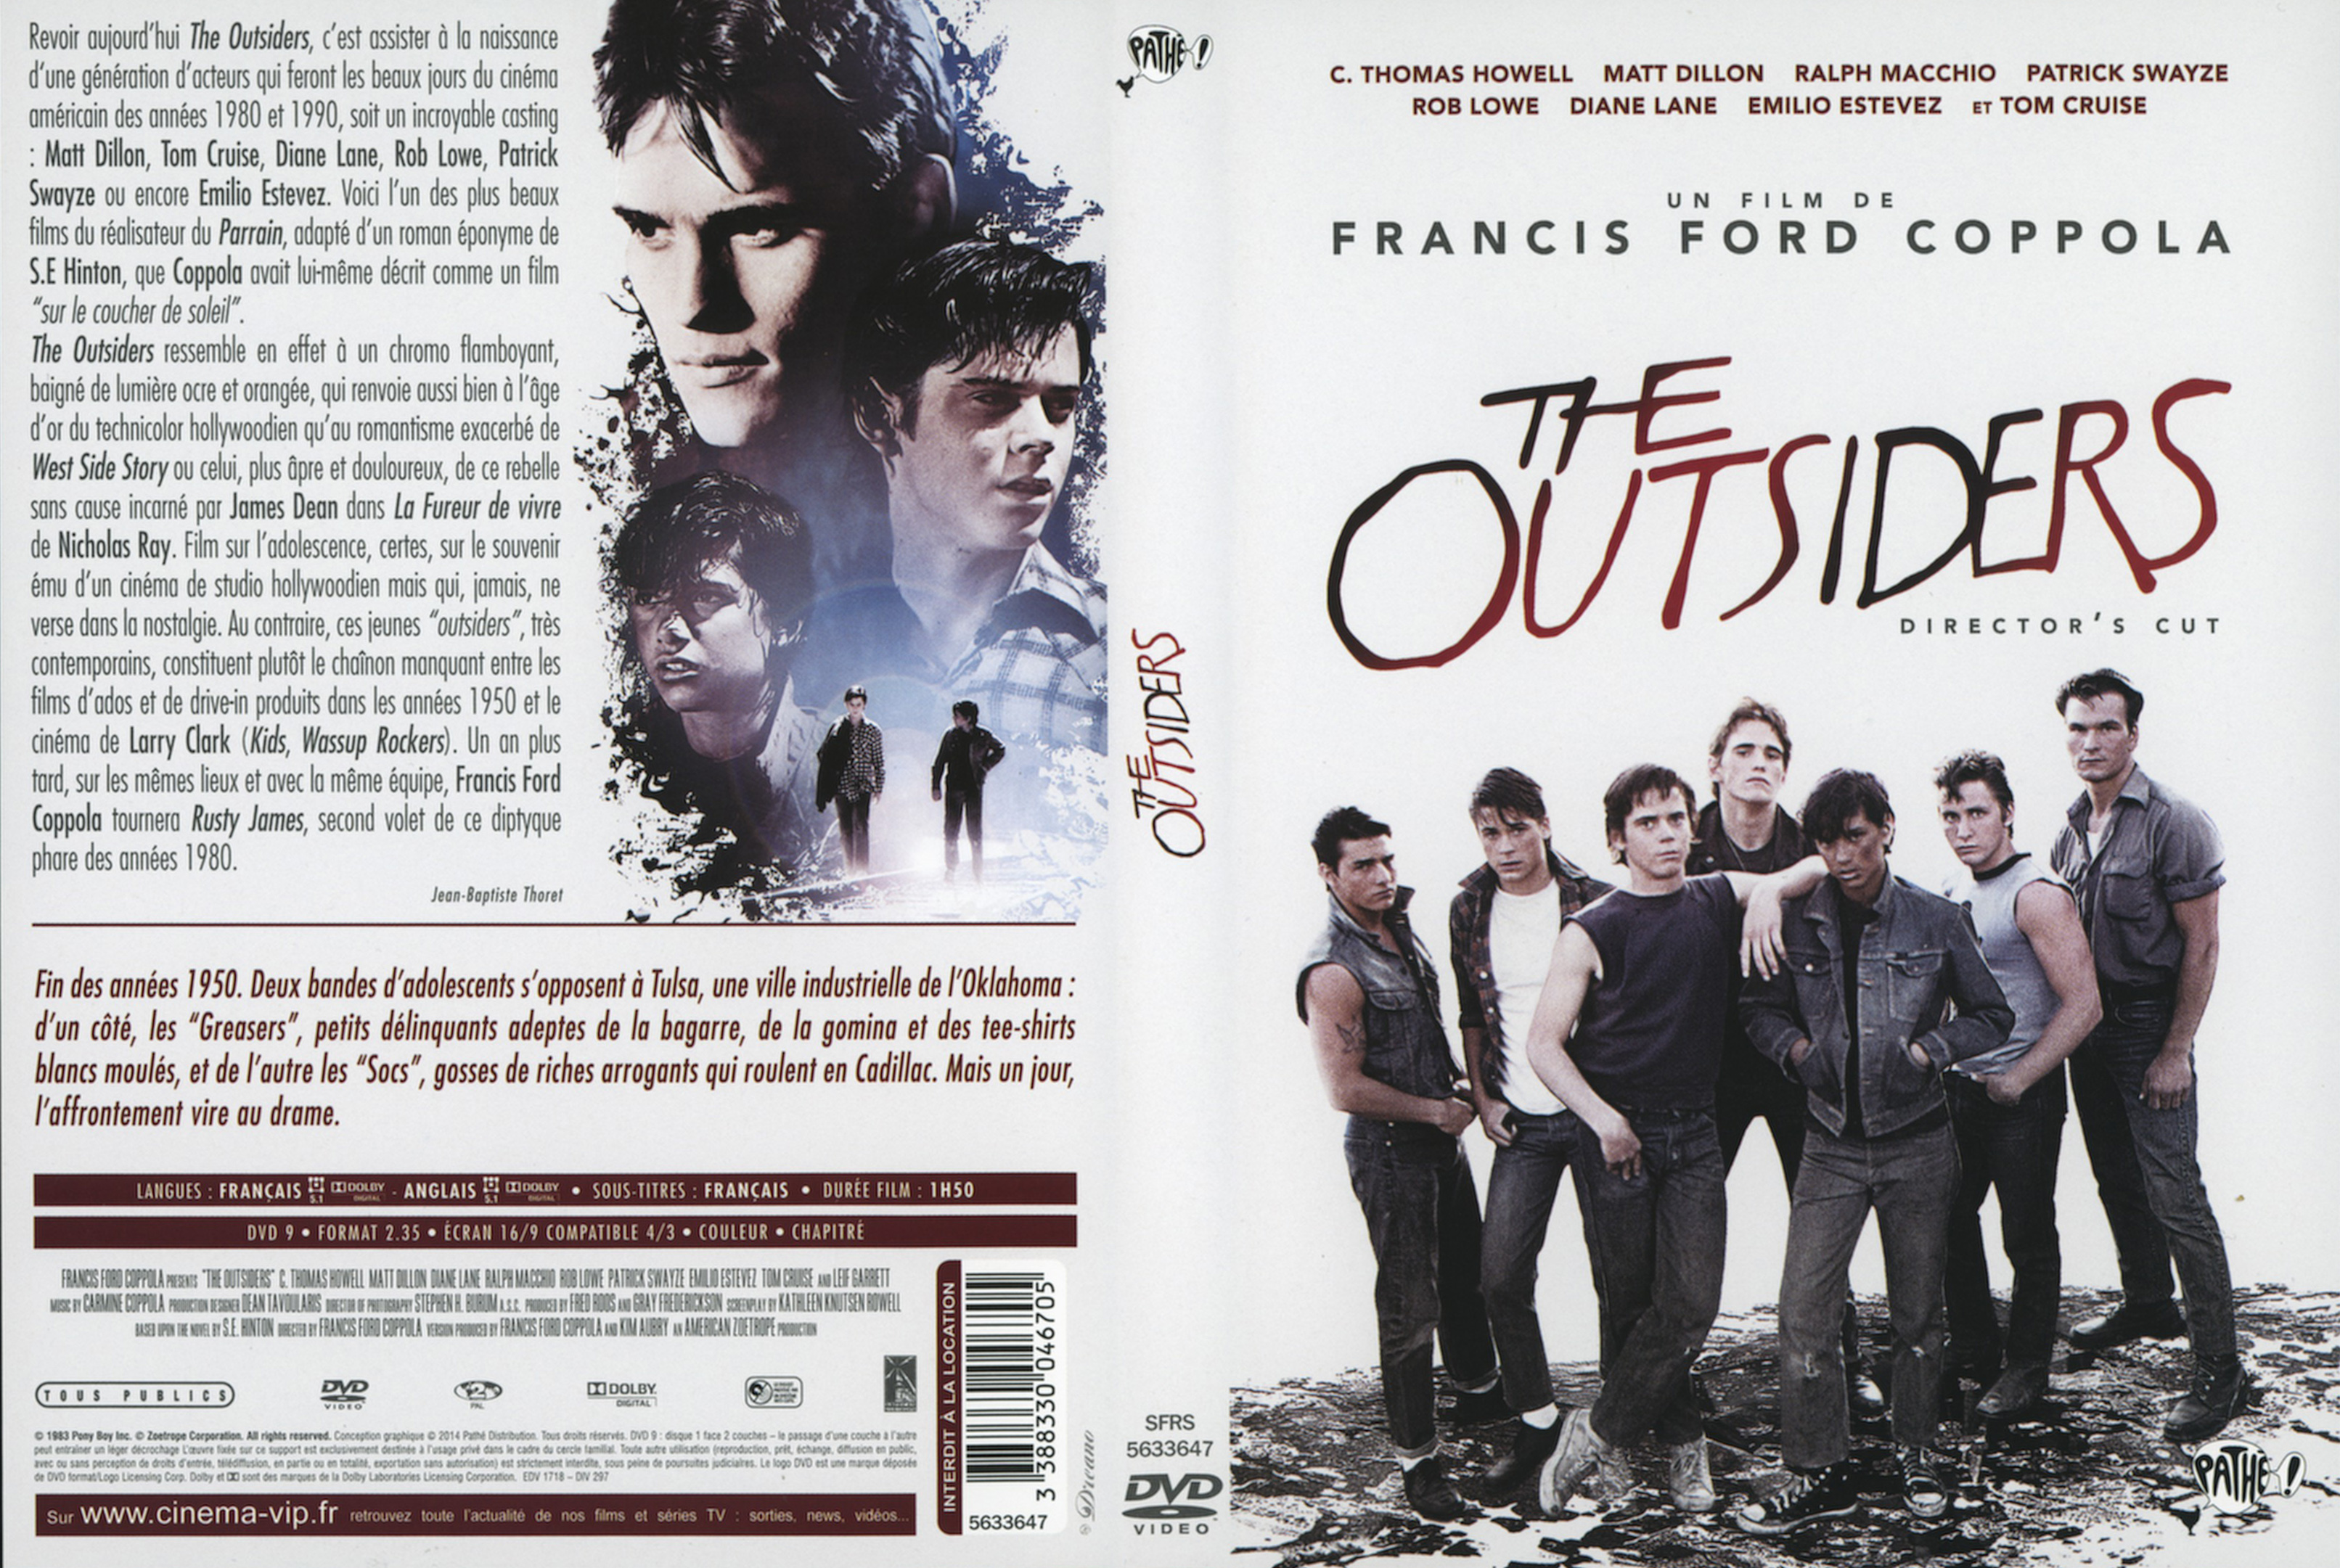 Jaquette DVD The Outsiders